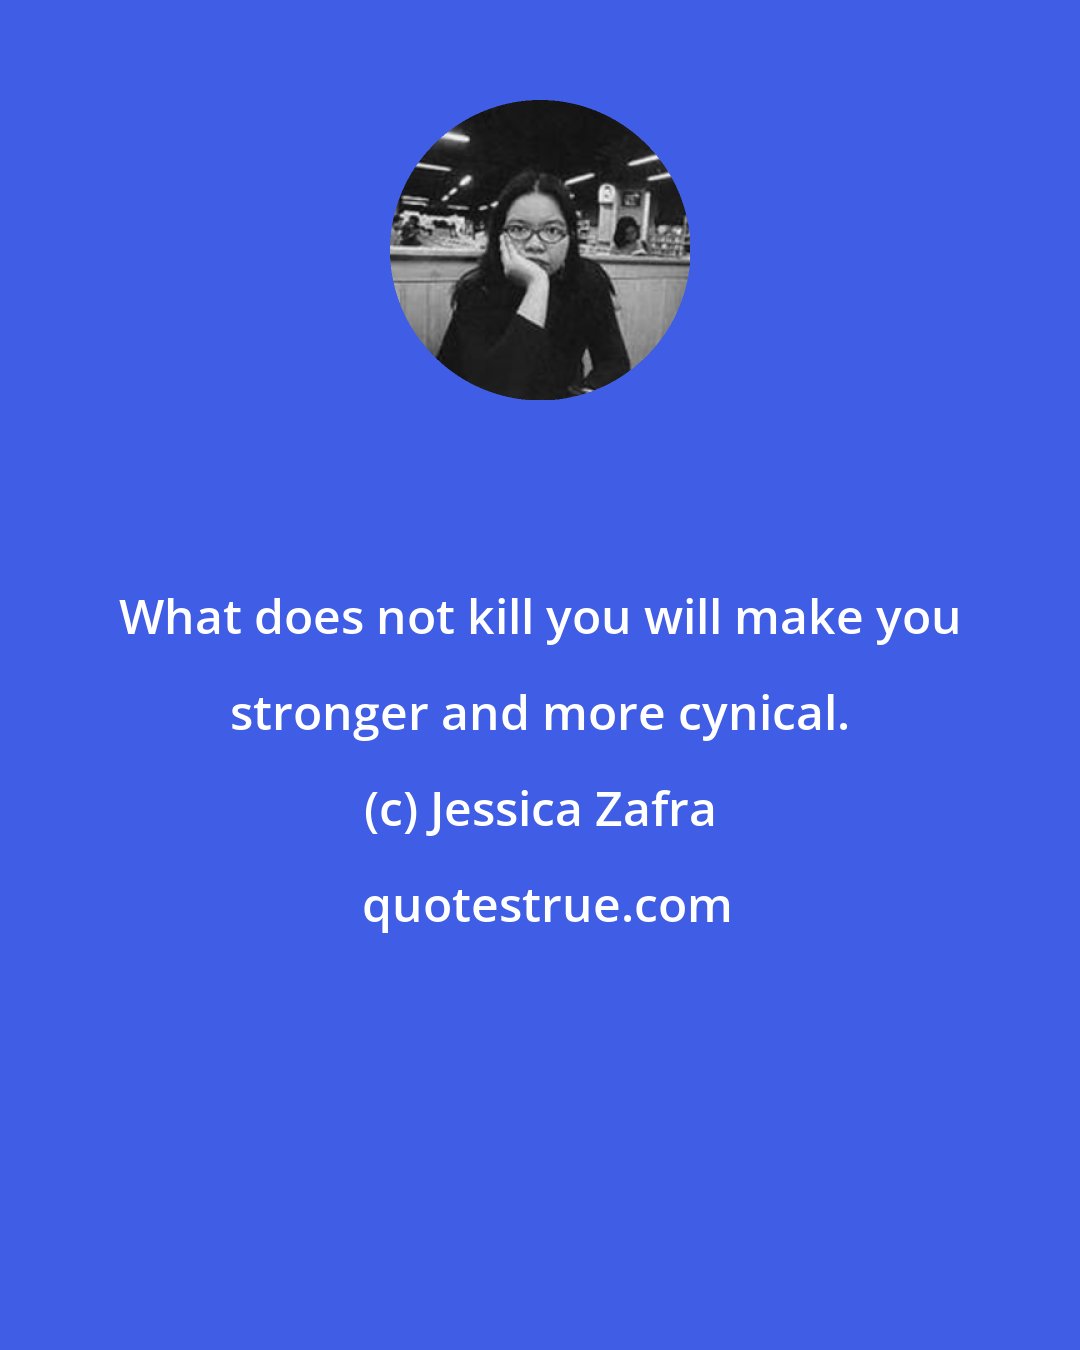 Jessica Zafra: What does not kill you will make you stronger and more cynical.